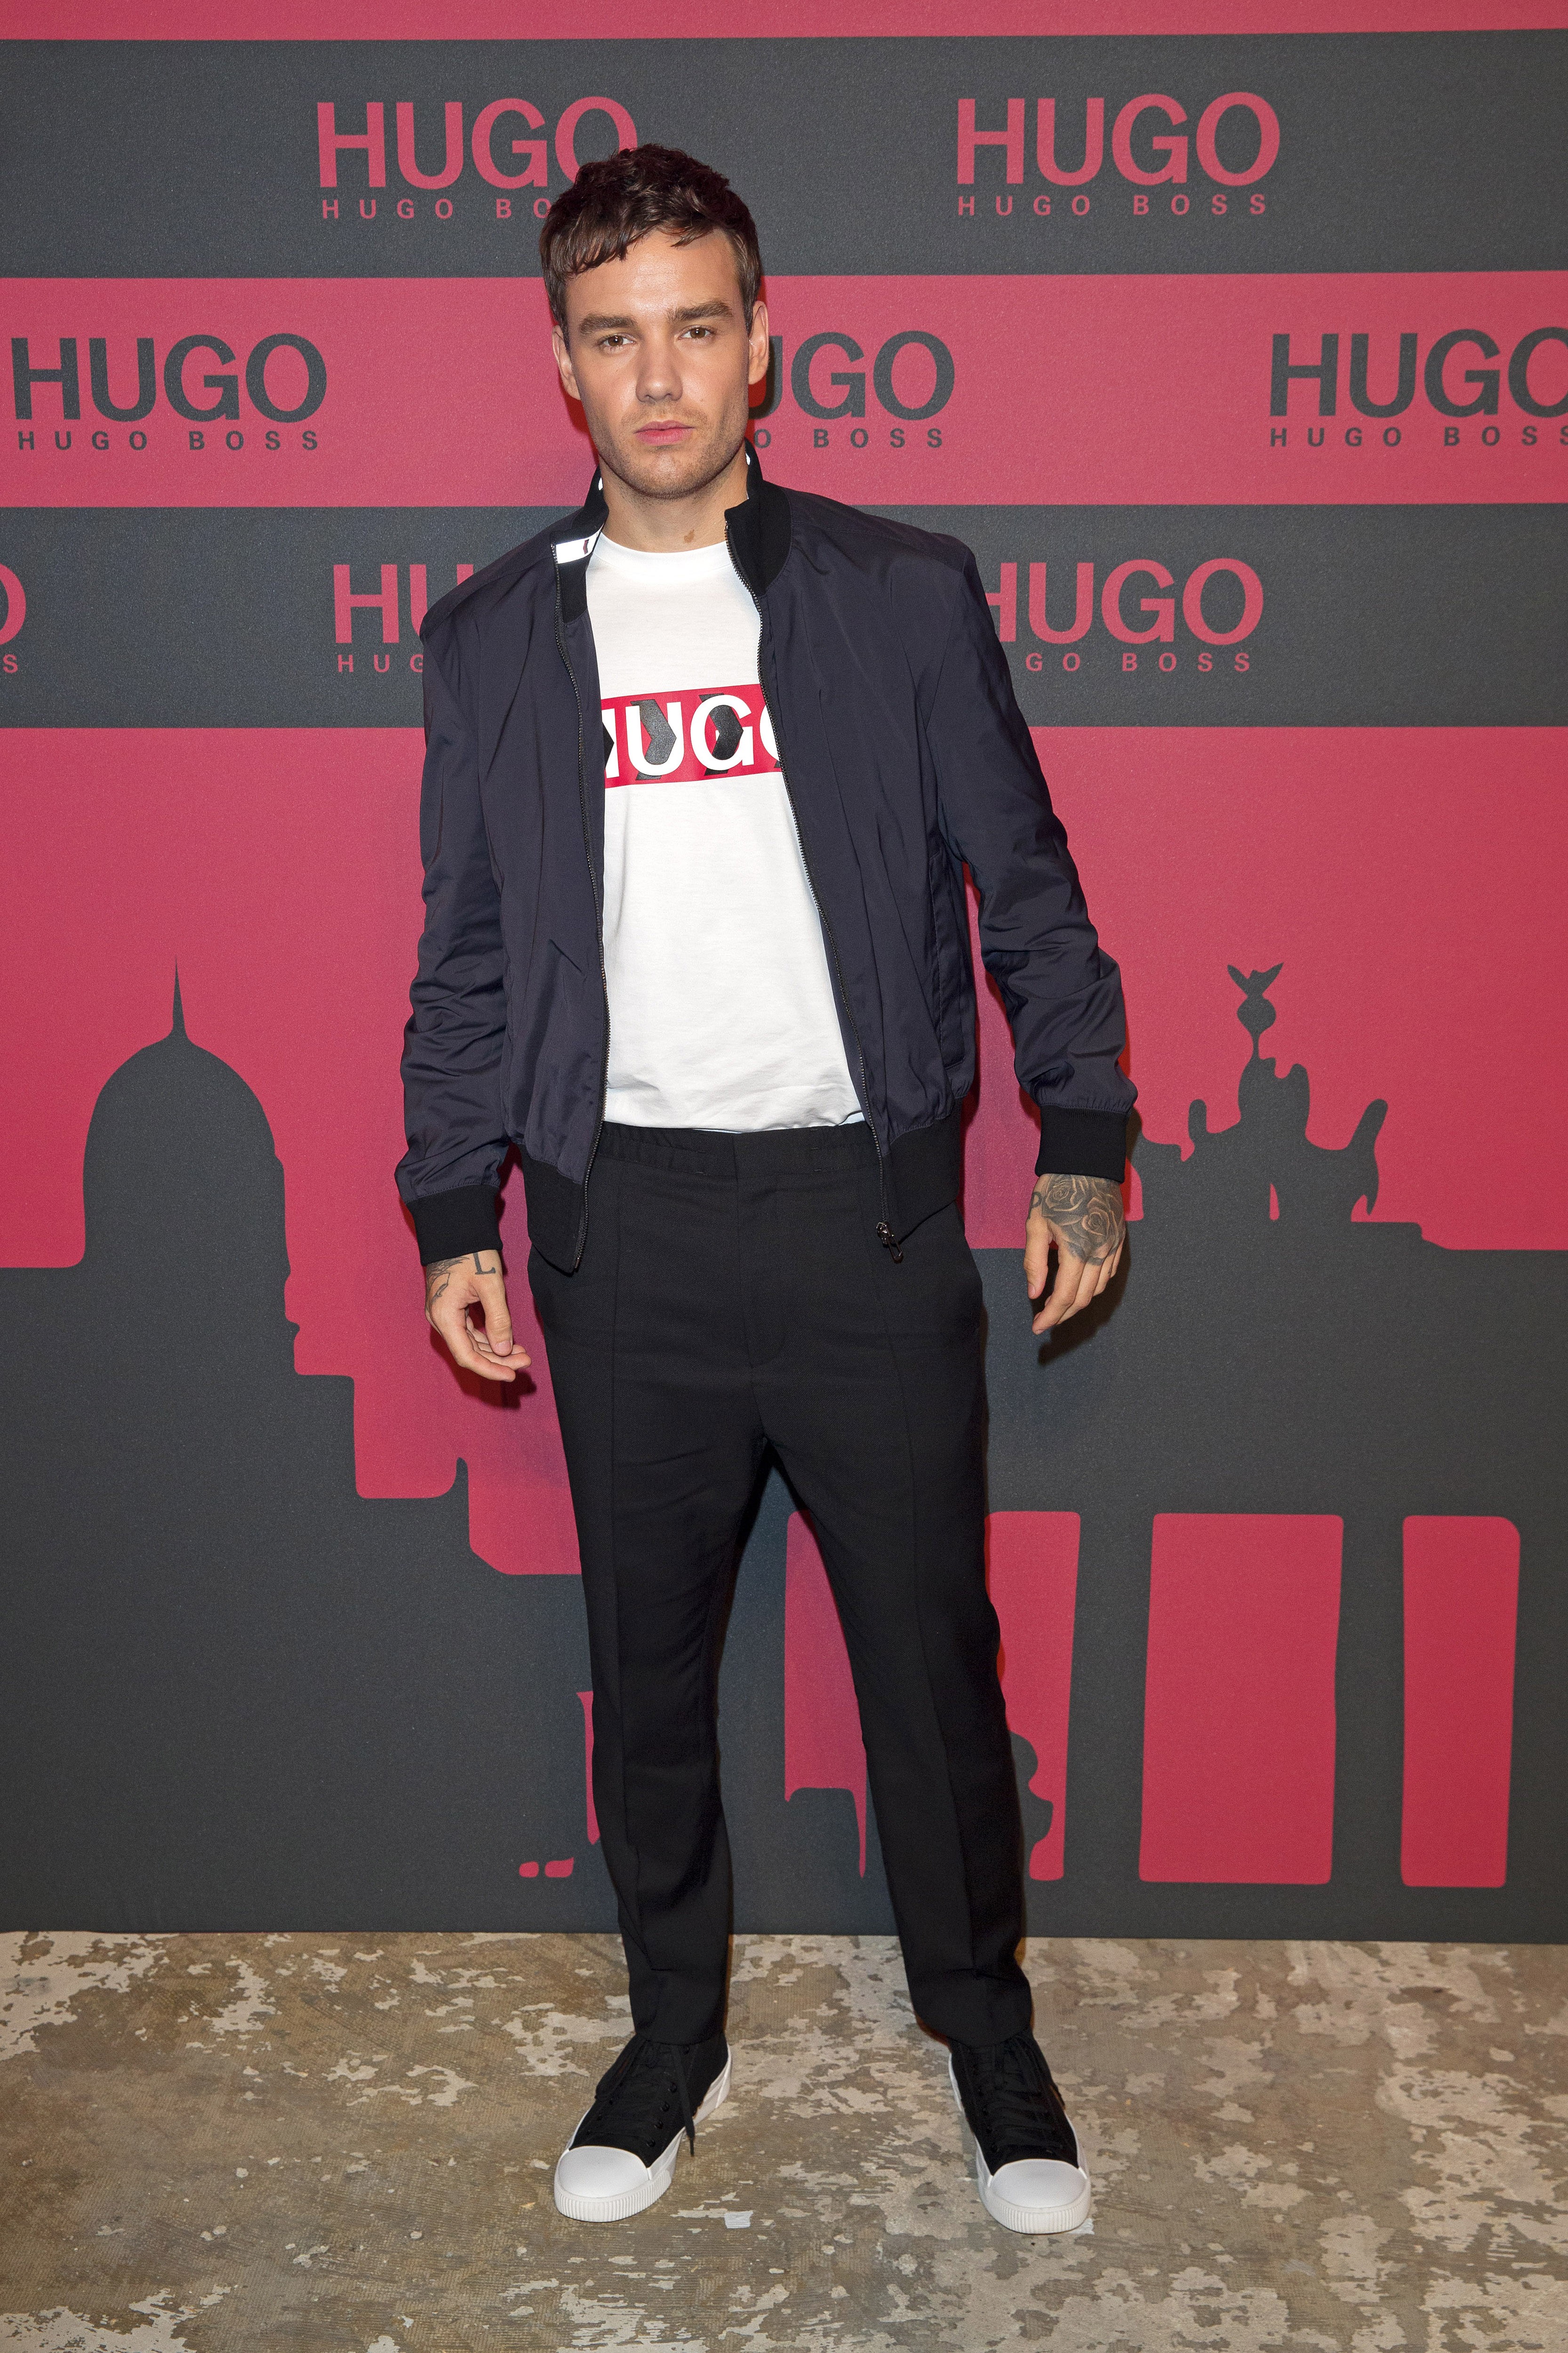 BERLIN, GERMANY - JULY 03: at the HUGO Launch Party with live performance by Liam Payne at Wriezener Karree on July 03, 2019 in Berlin, Germany. (Photo by Andreas Rentz/Getty Images for Hugo Boss) (Foto: Getty Images for Hugo Boss)